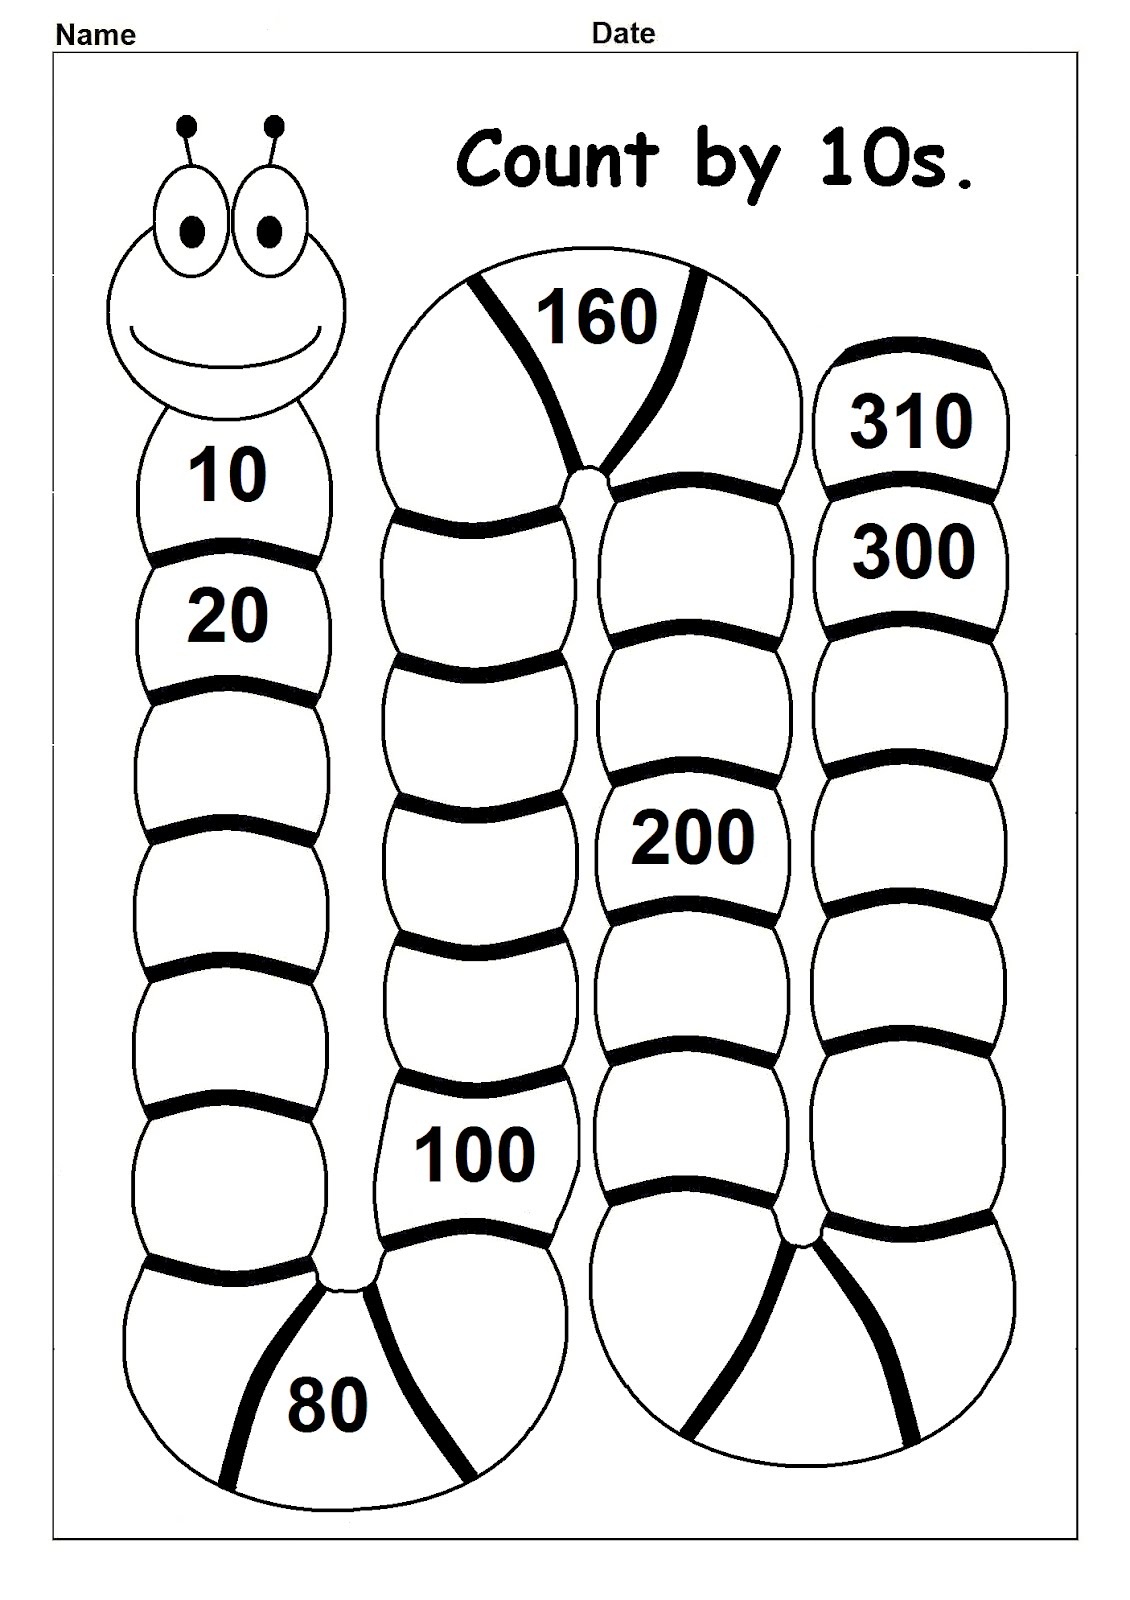 skip-counting-by-10s-worksheet-twisty-noodle-grade-2-math-number